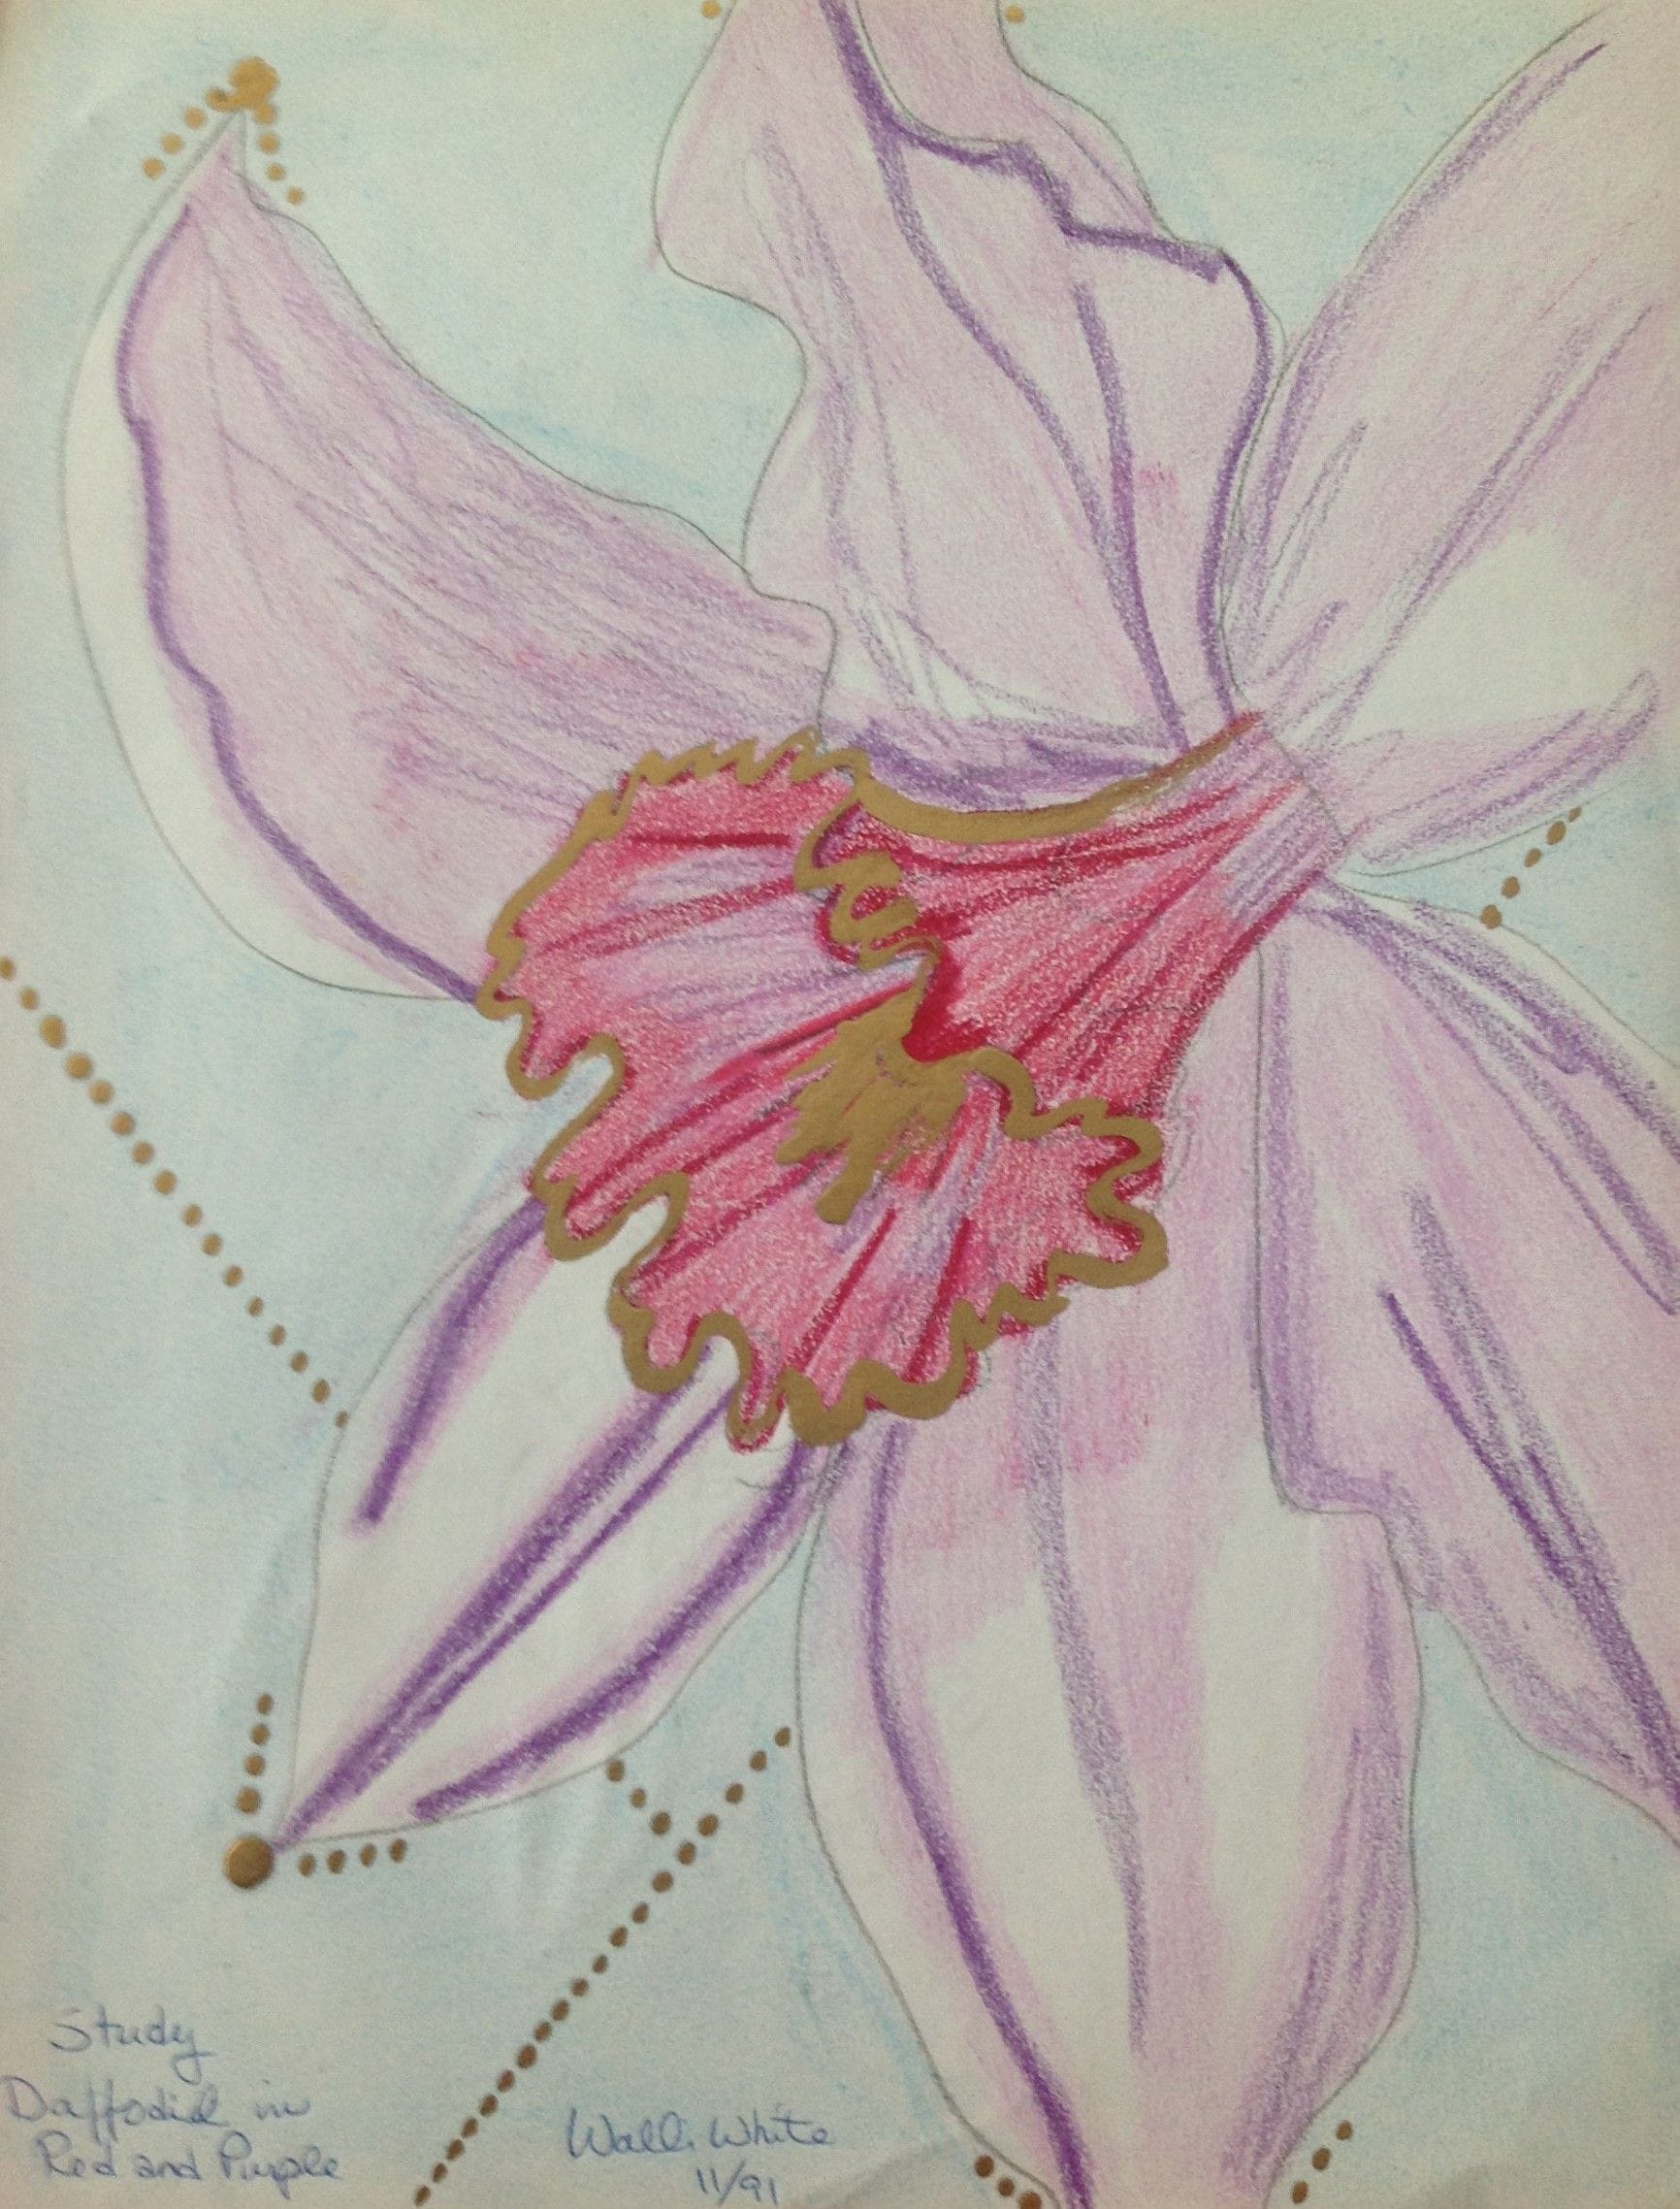 Daffodil in Red and Purple, 1991
Crayon and Gold Paint on Paper
8.5"W x 11"H, Walli White, artist